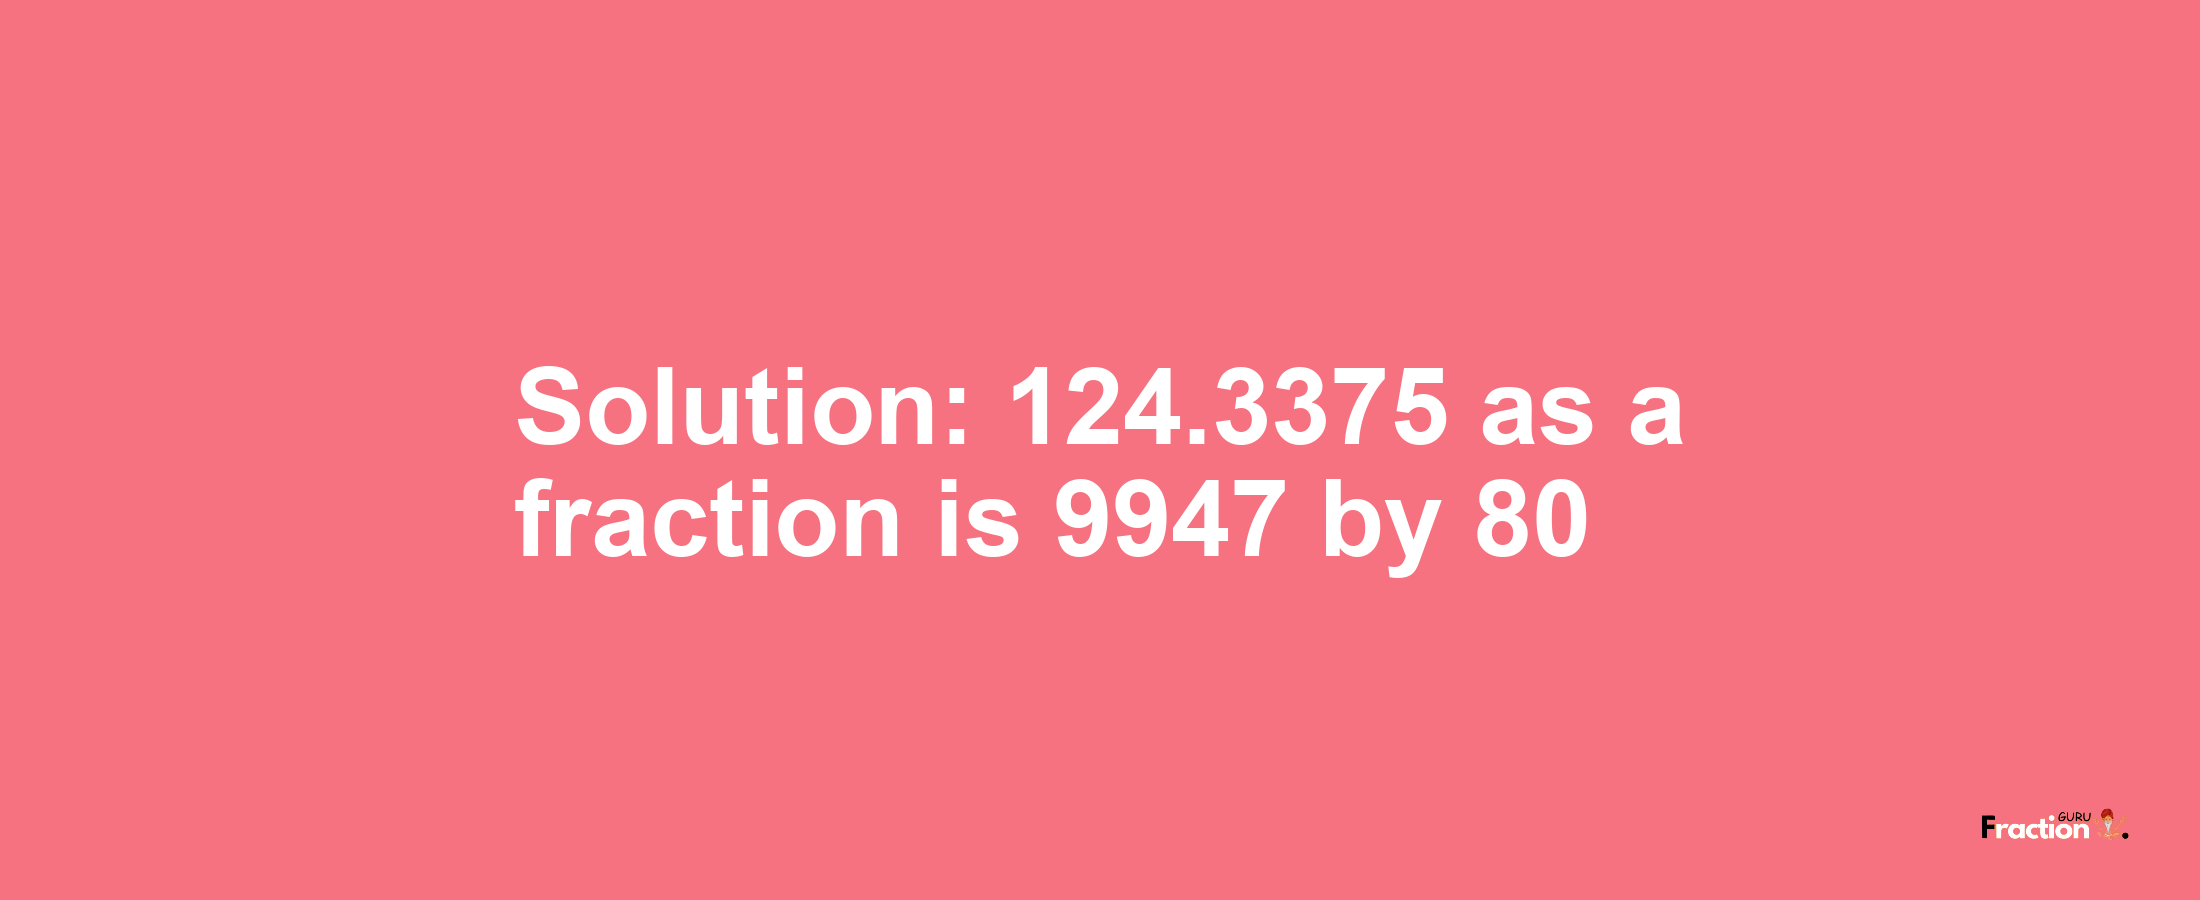 Solution:124.3375 as a fraction is 9947/80